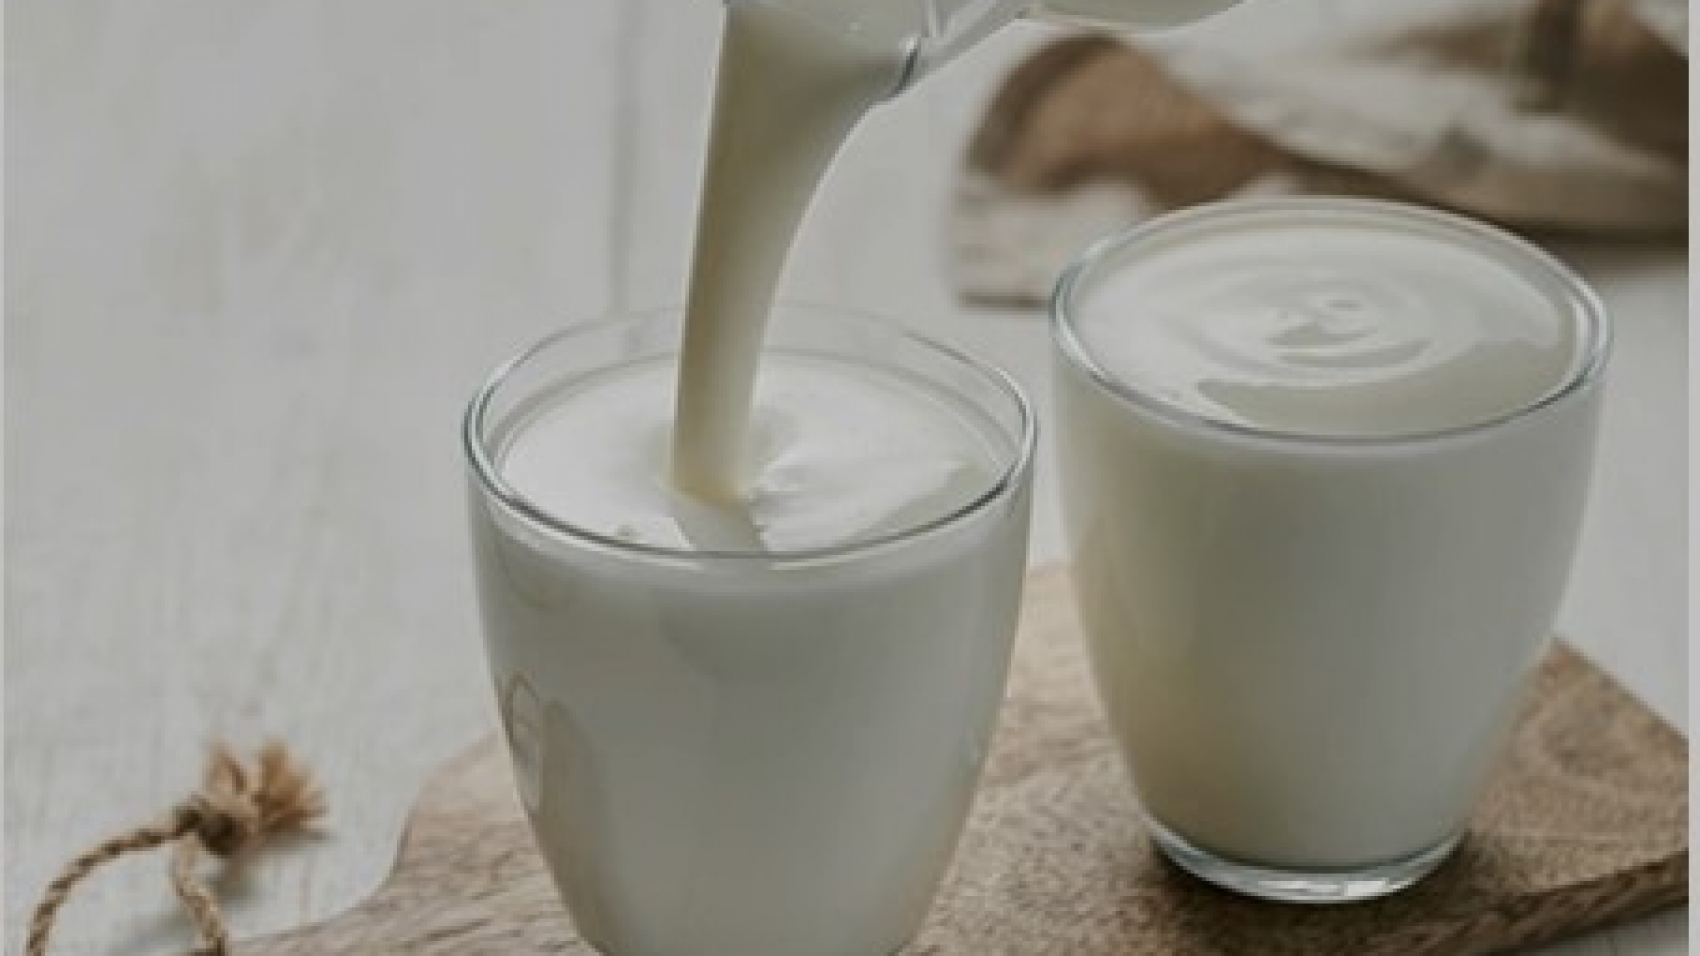 https://www.bbcgoodfood.com/howto/guide/health-benefits-kefir